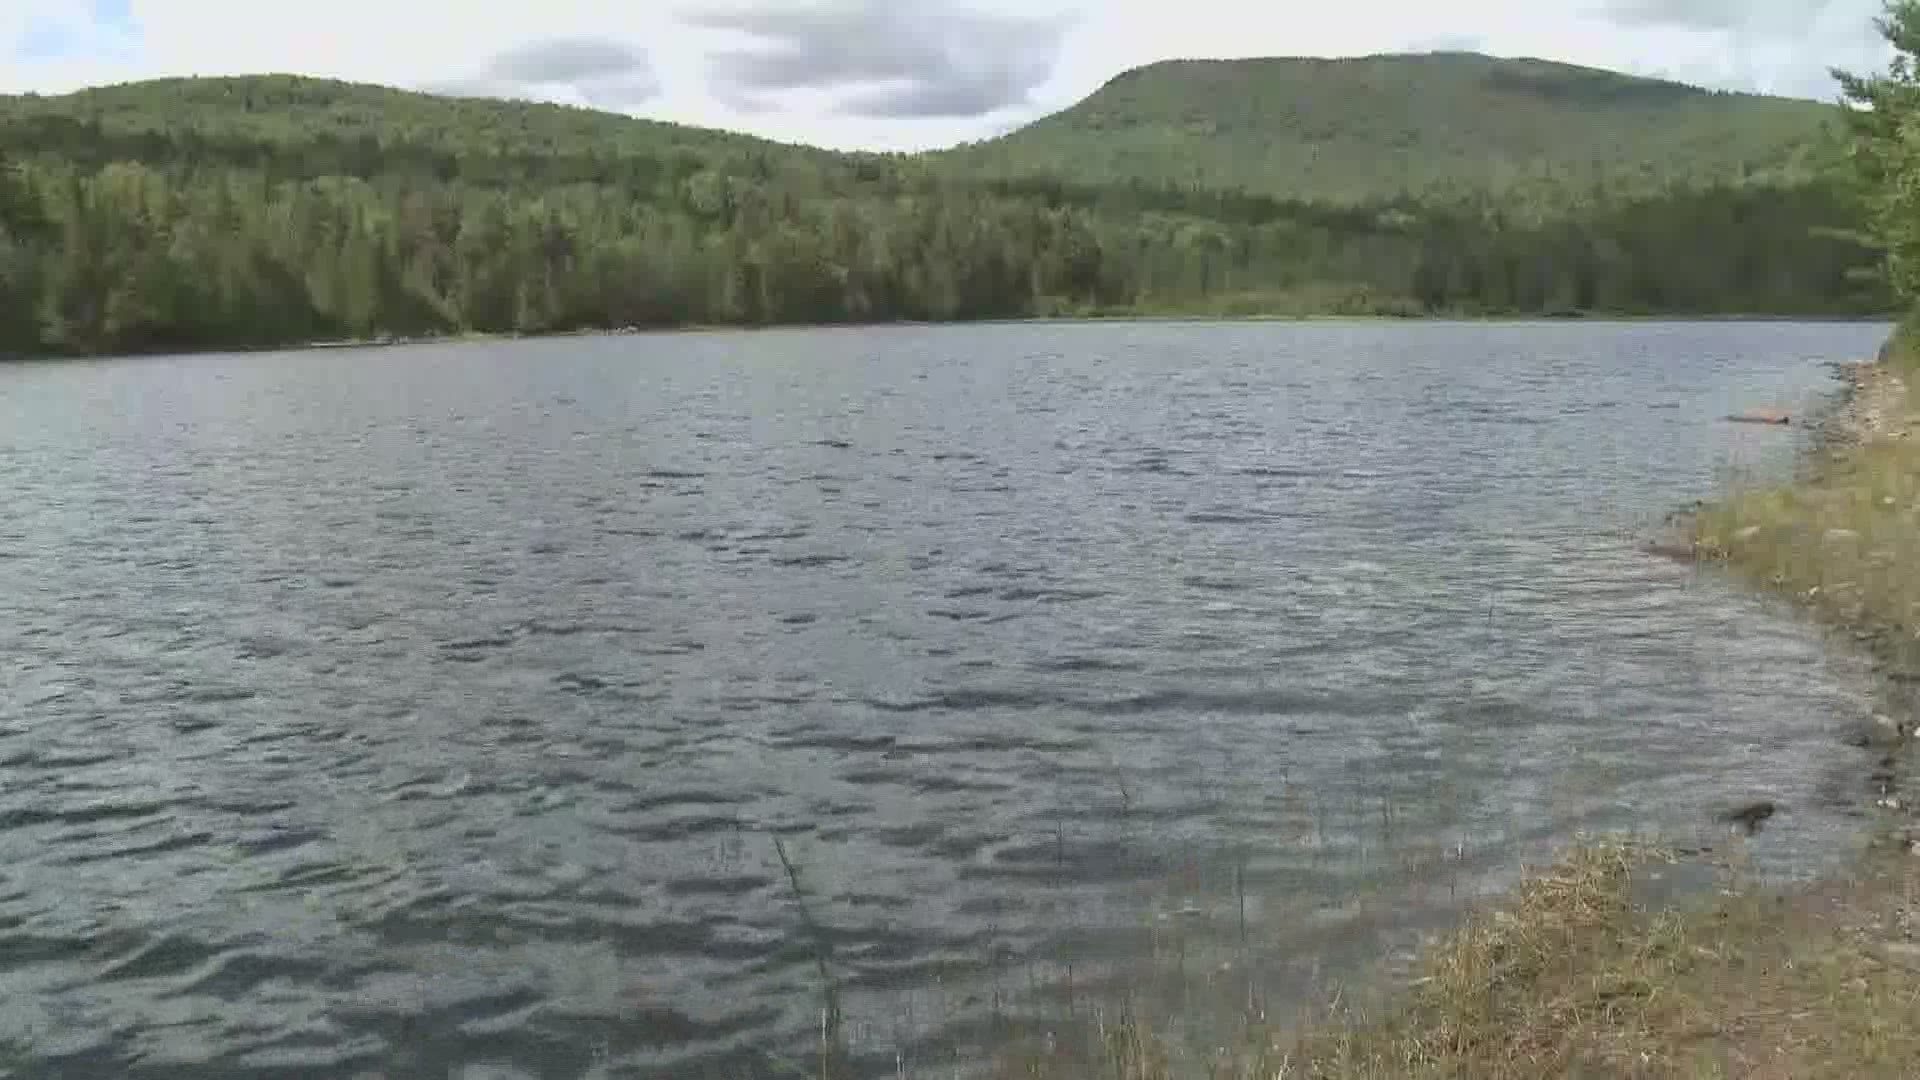 The High Peaks Alliance and the Trust for Public Lands raised money, bought the property of Shiloh Pond and have given it to the town of Kingfield to be preserved.